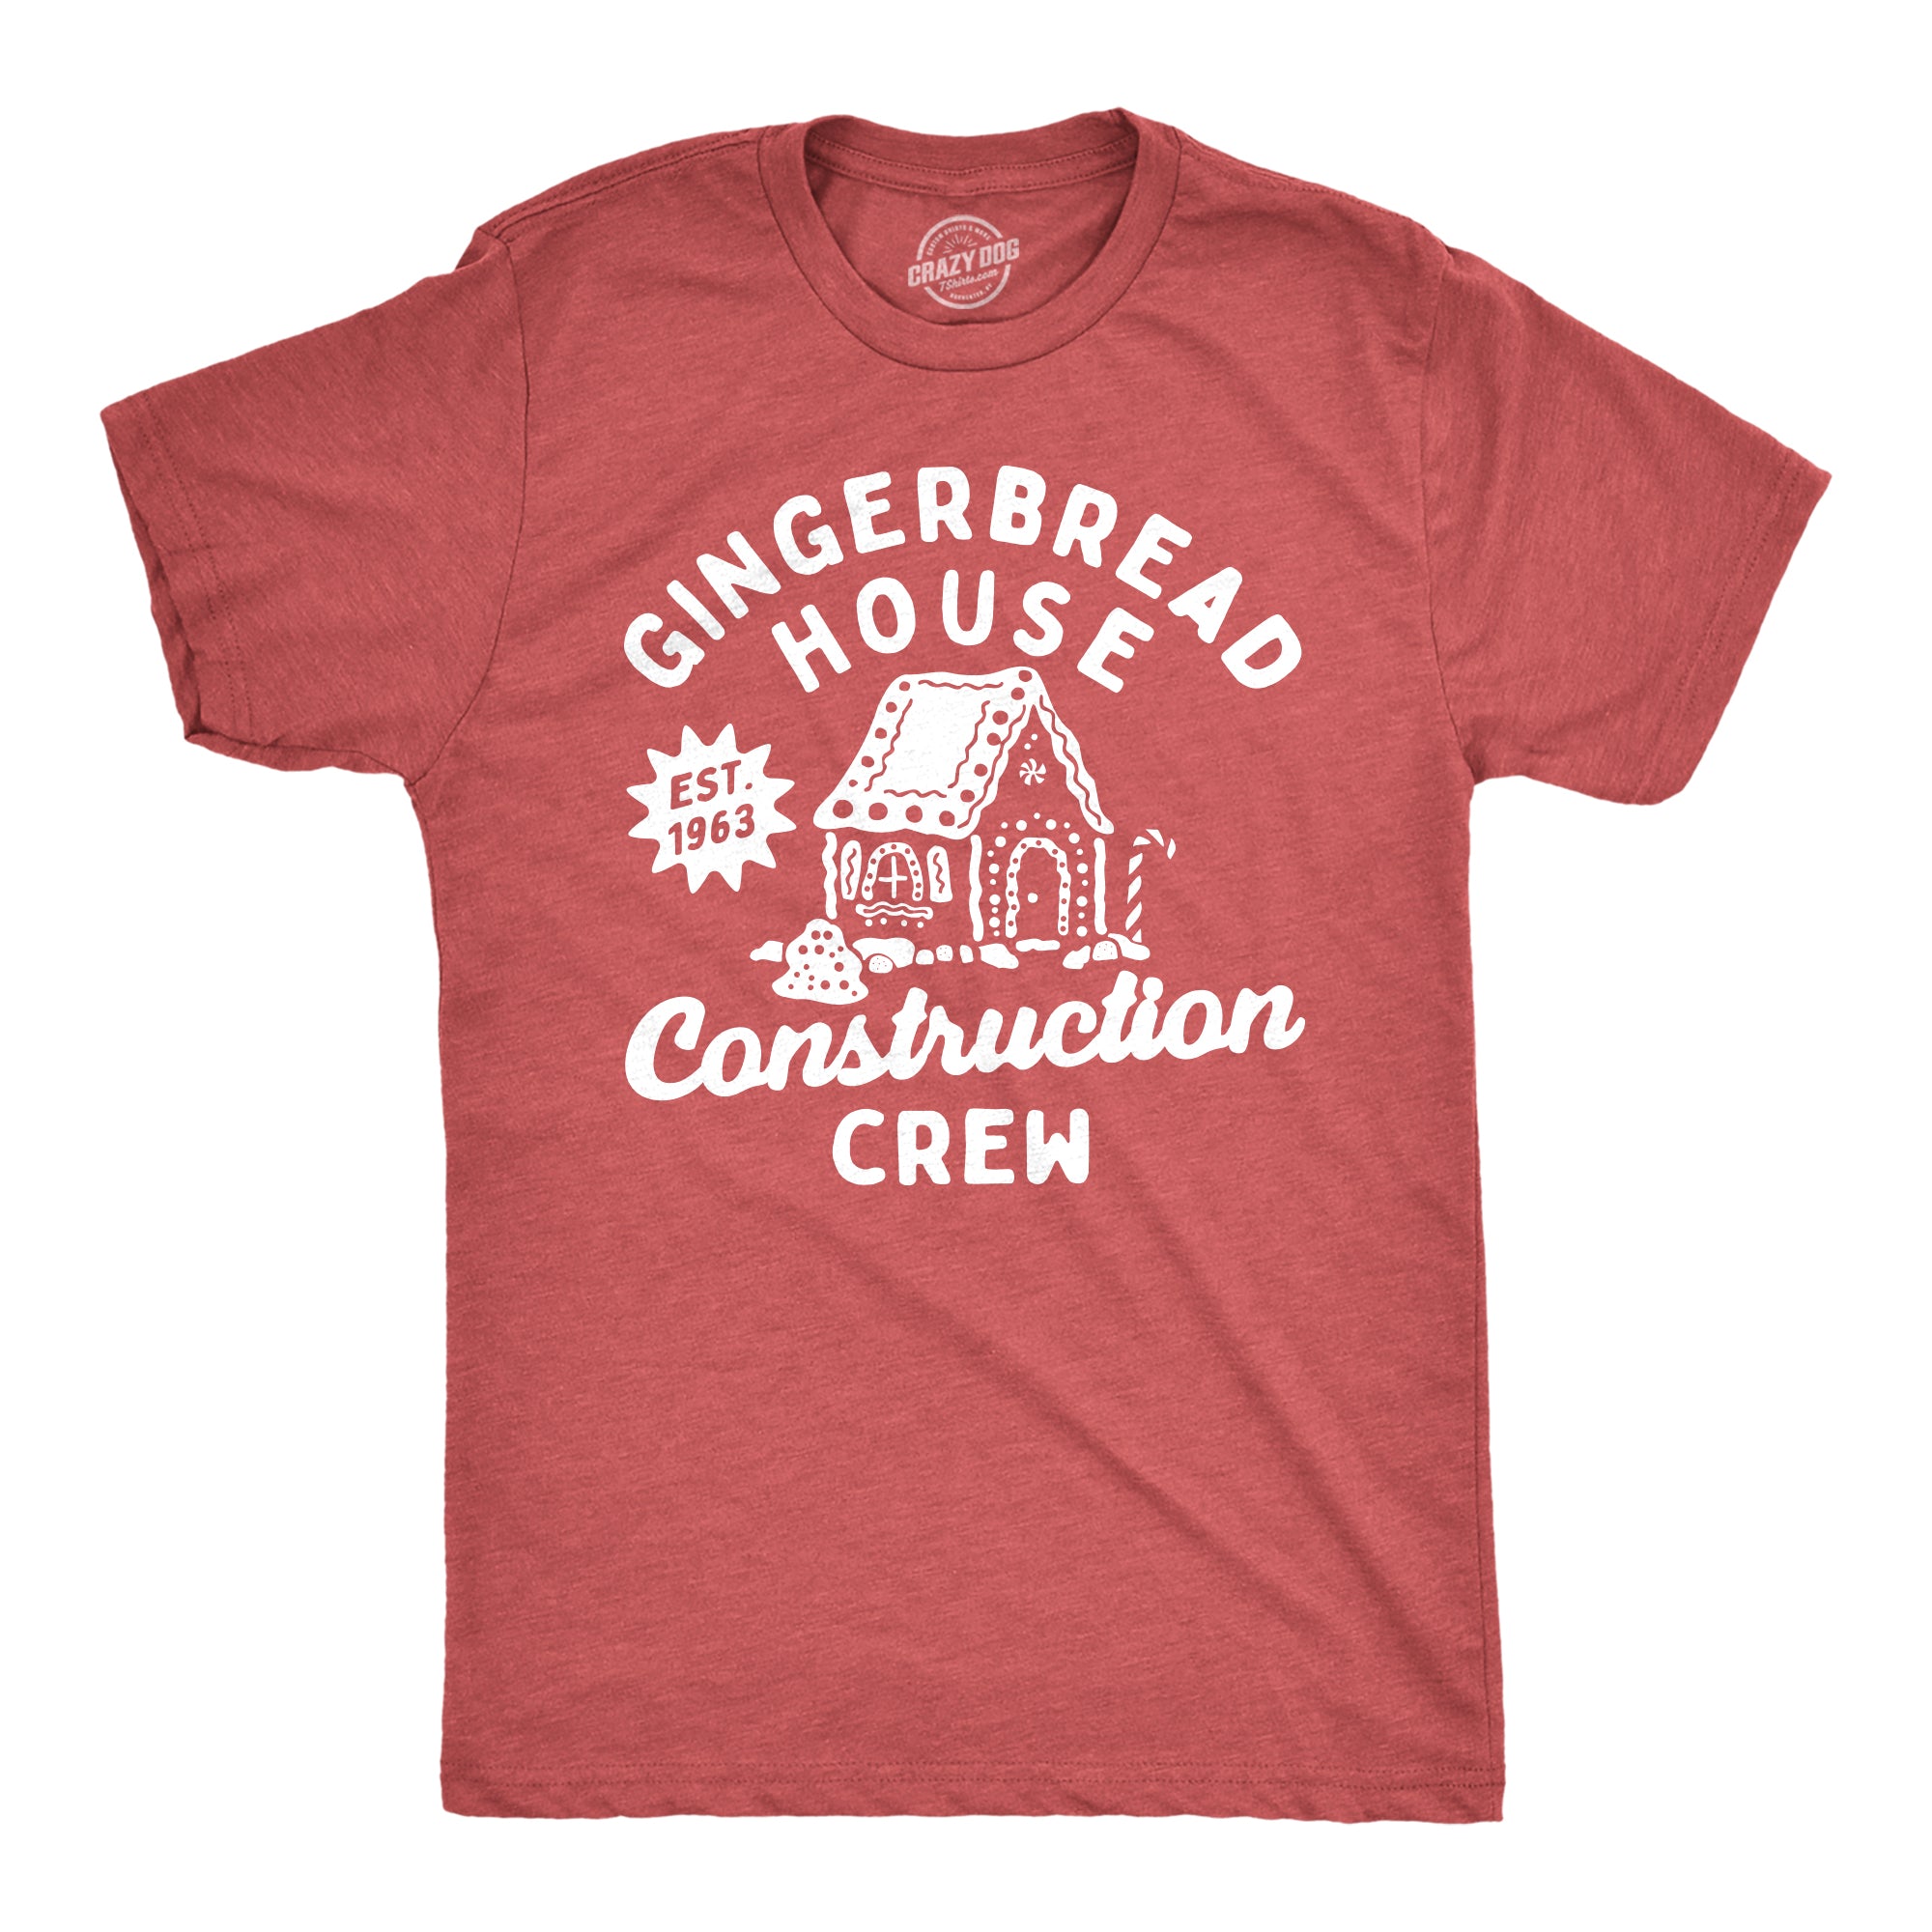 Funny Heather Red - CONSTRUCTION Gingerbread House Construction Crew Mens T Shirt Nerdy Christmas Sarcastic Tee